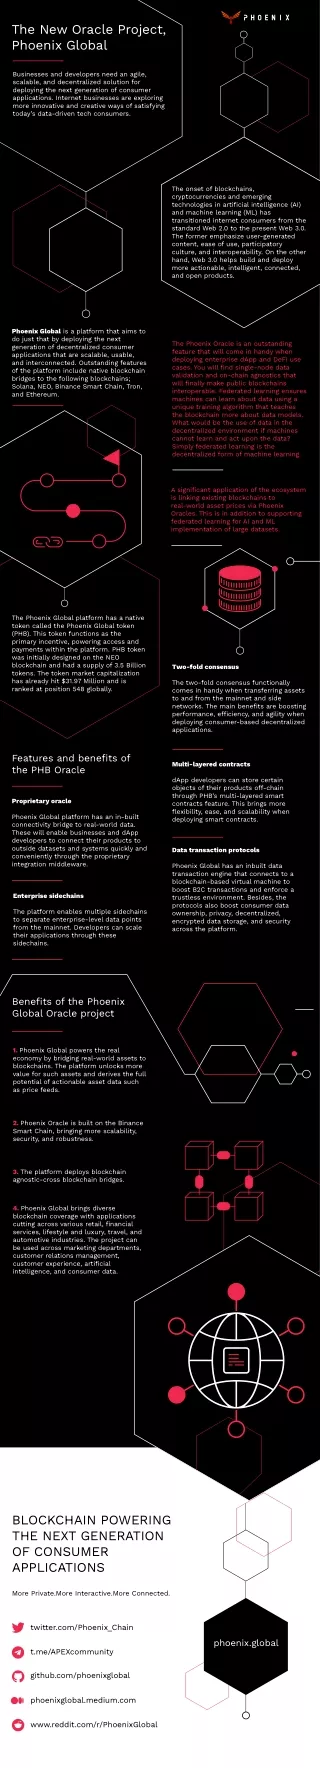 The New Oracle Project, Phoenix Global